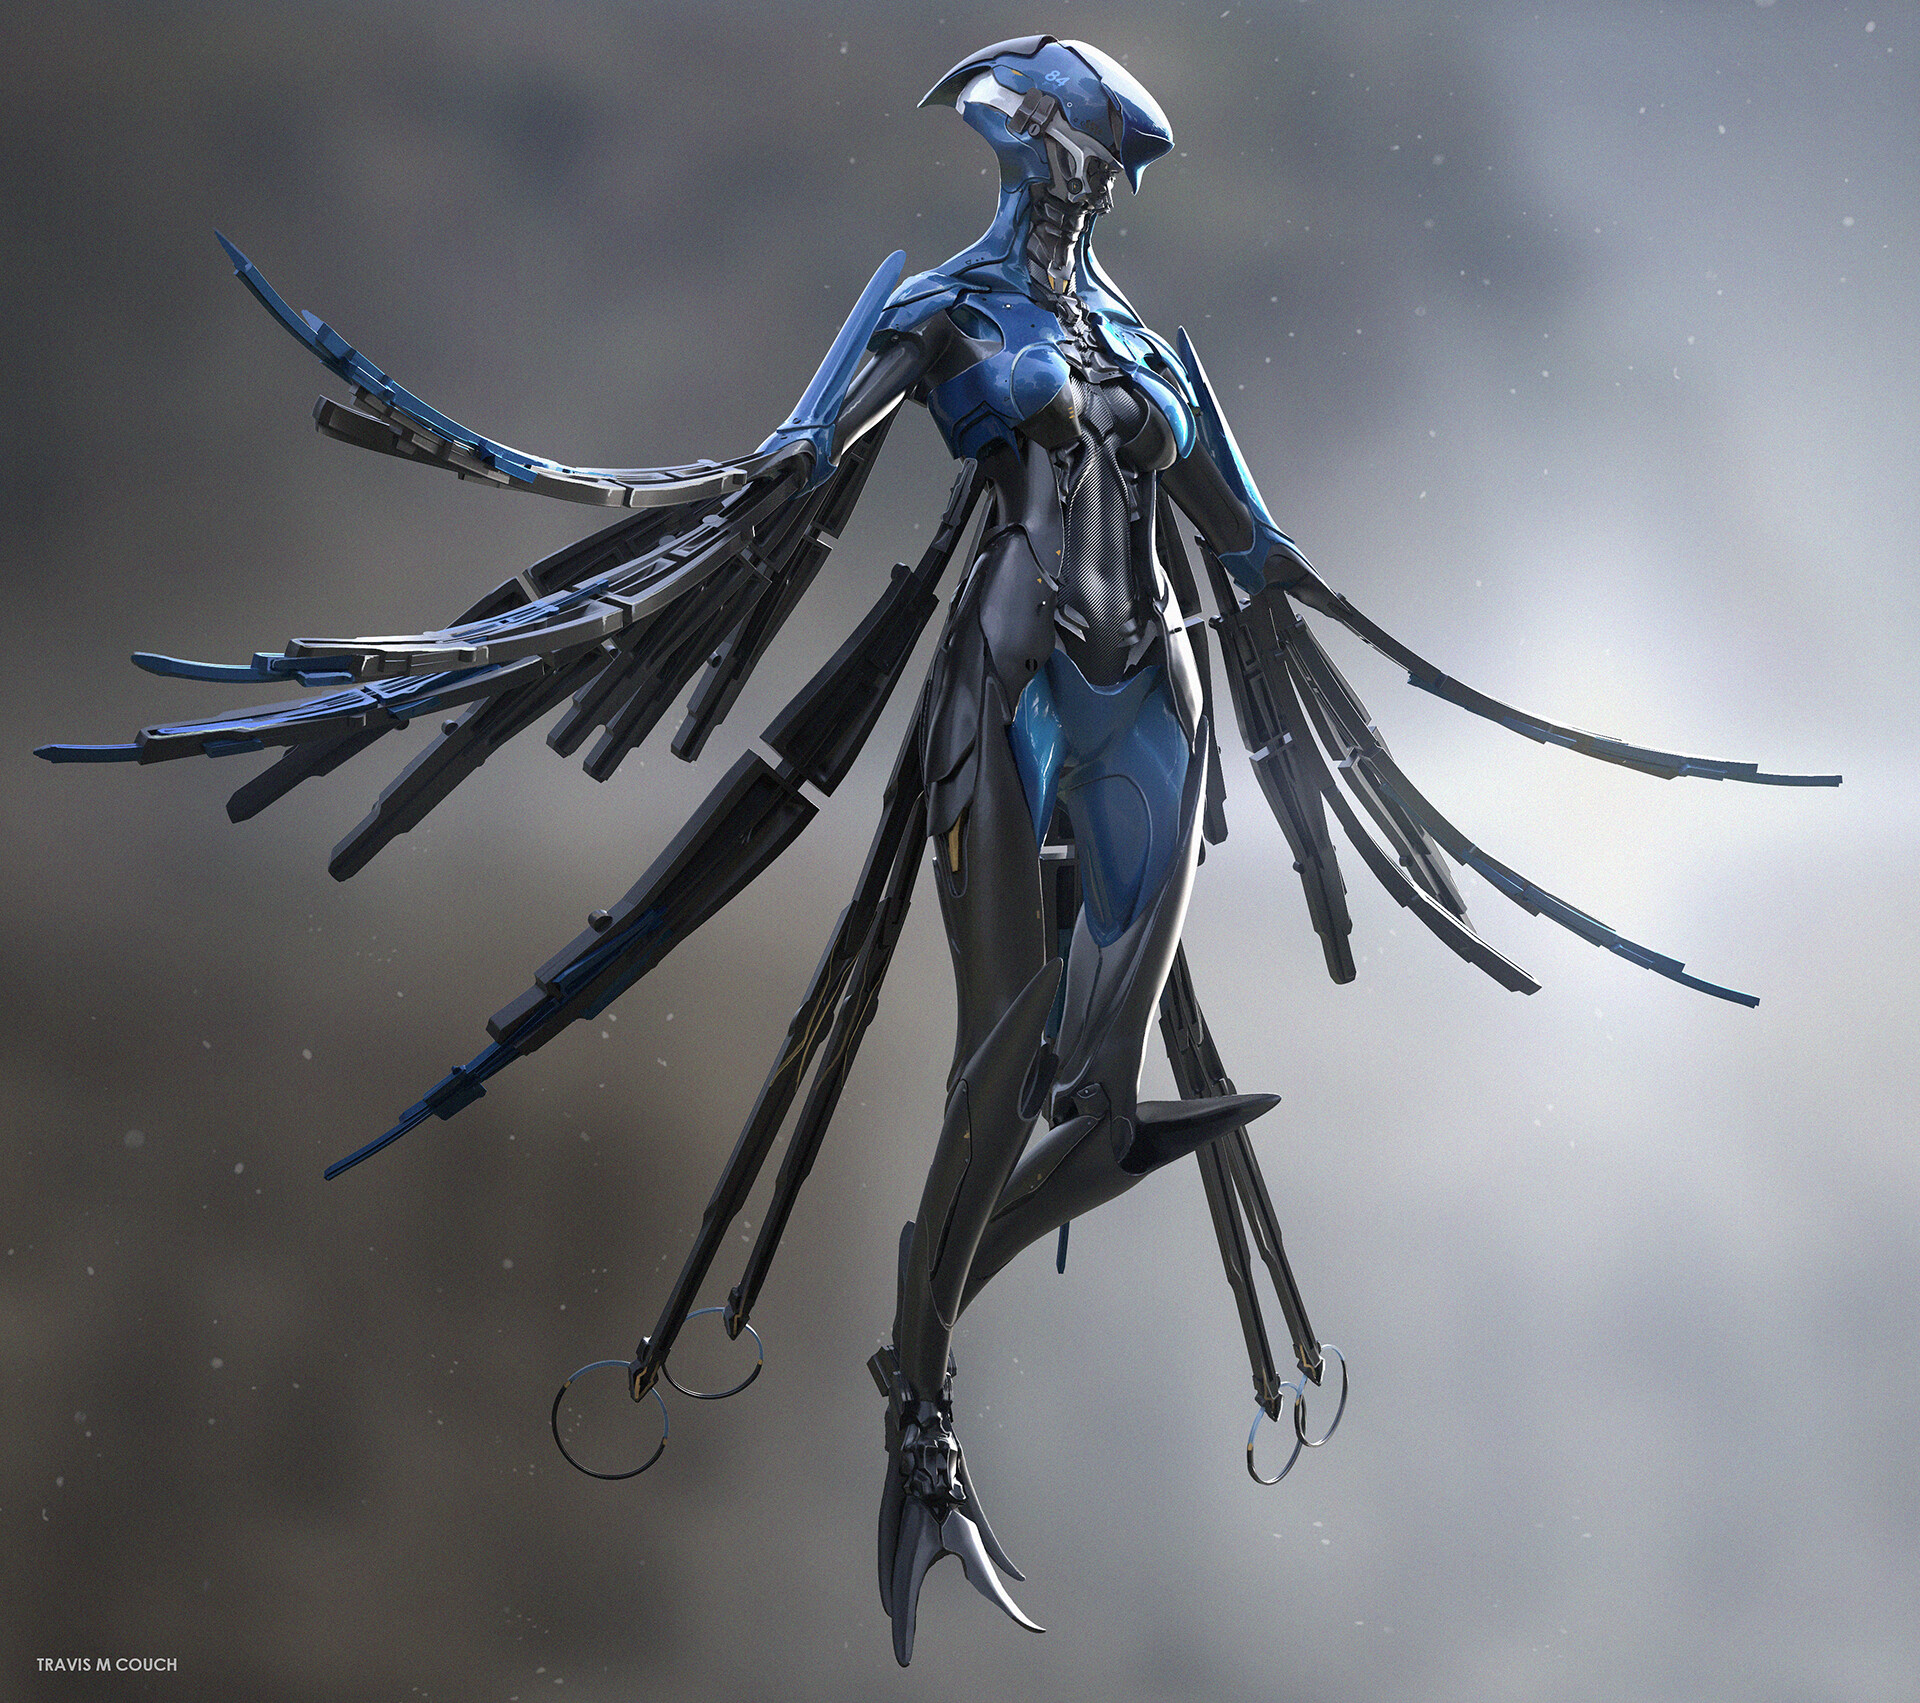 Bird Cyborg by Travis M Couch Sex Images Hq